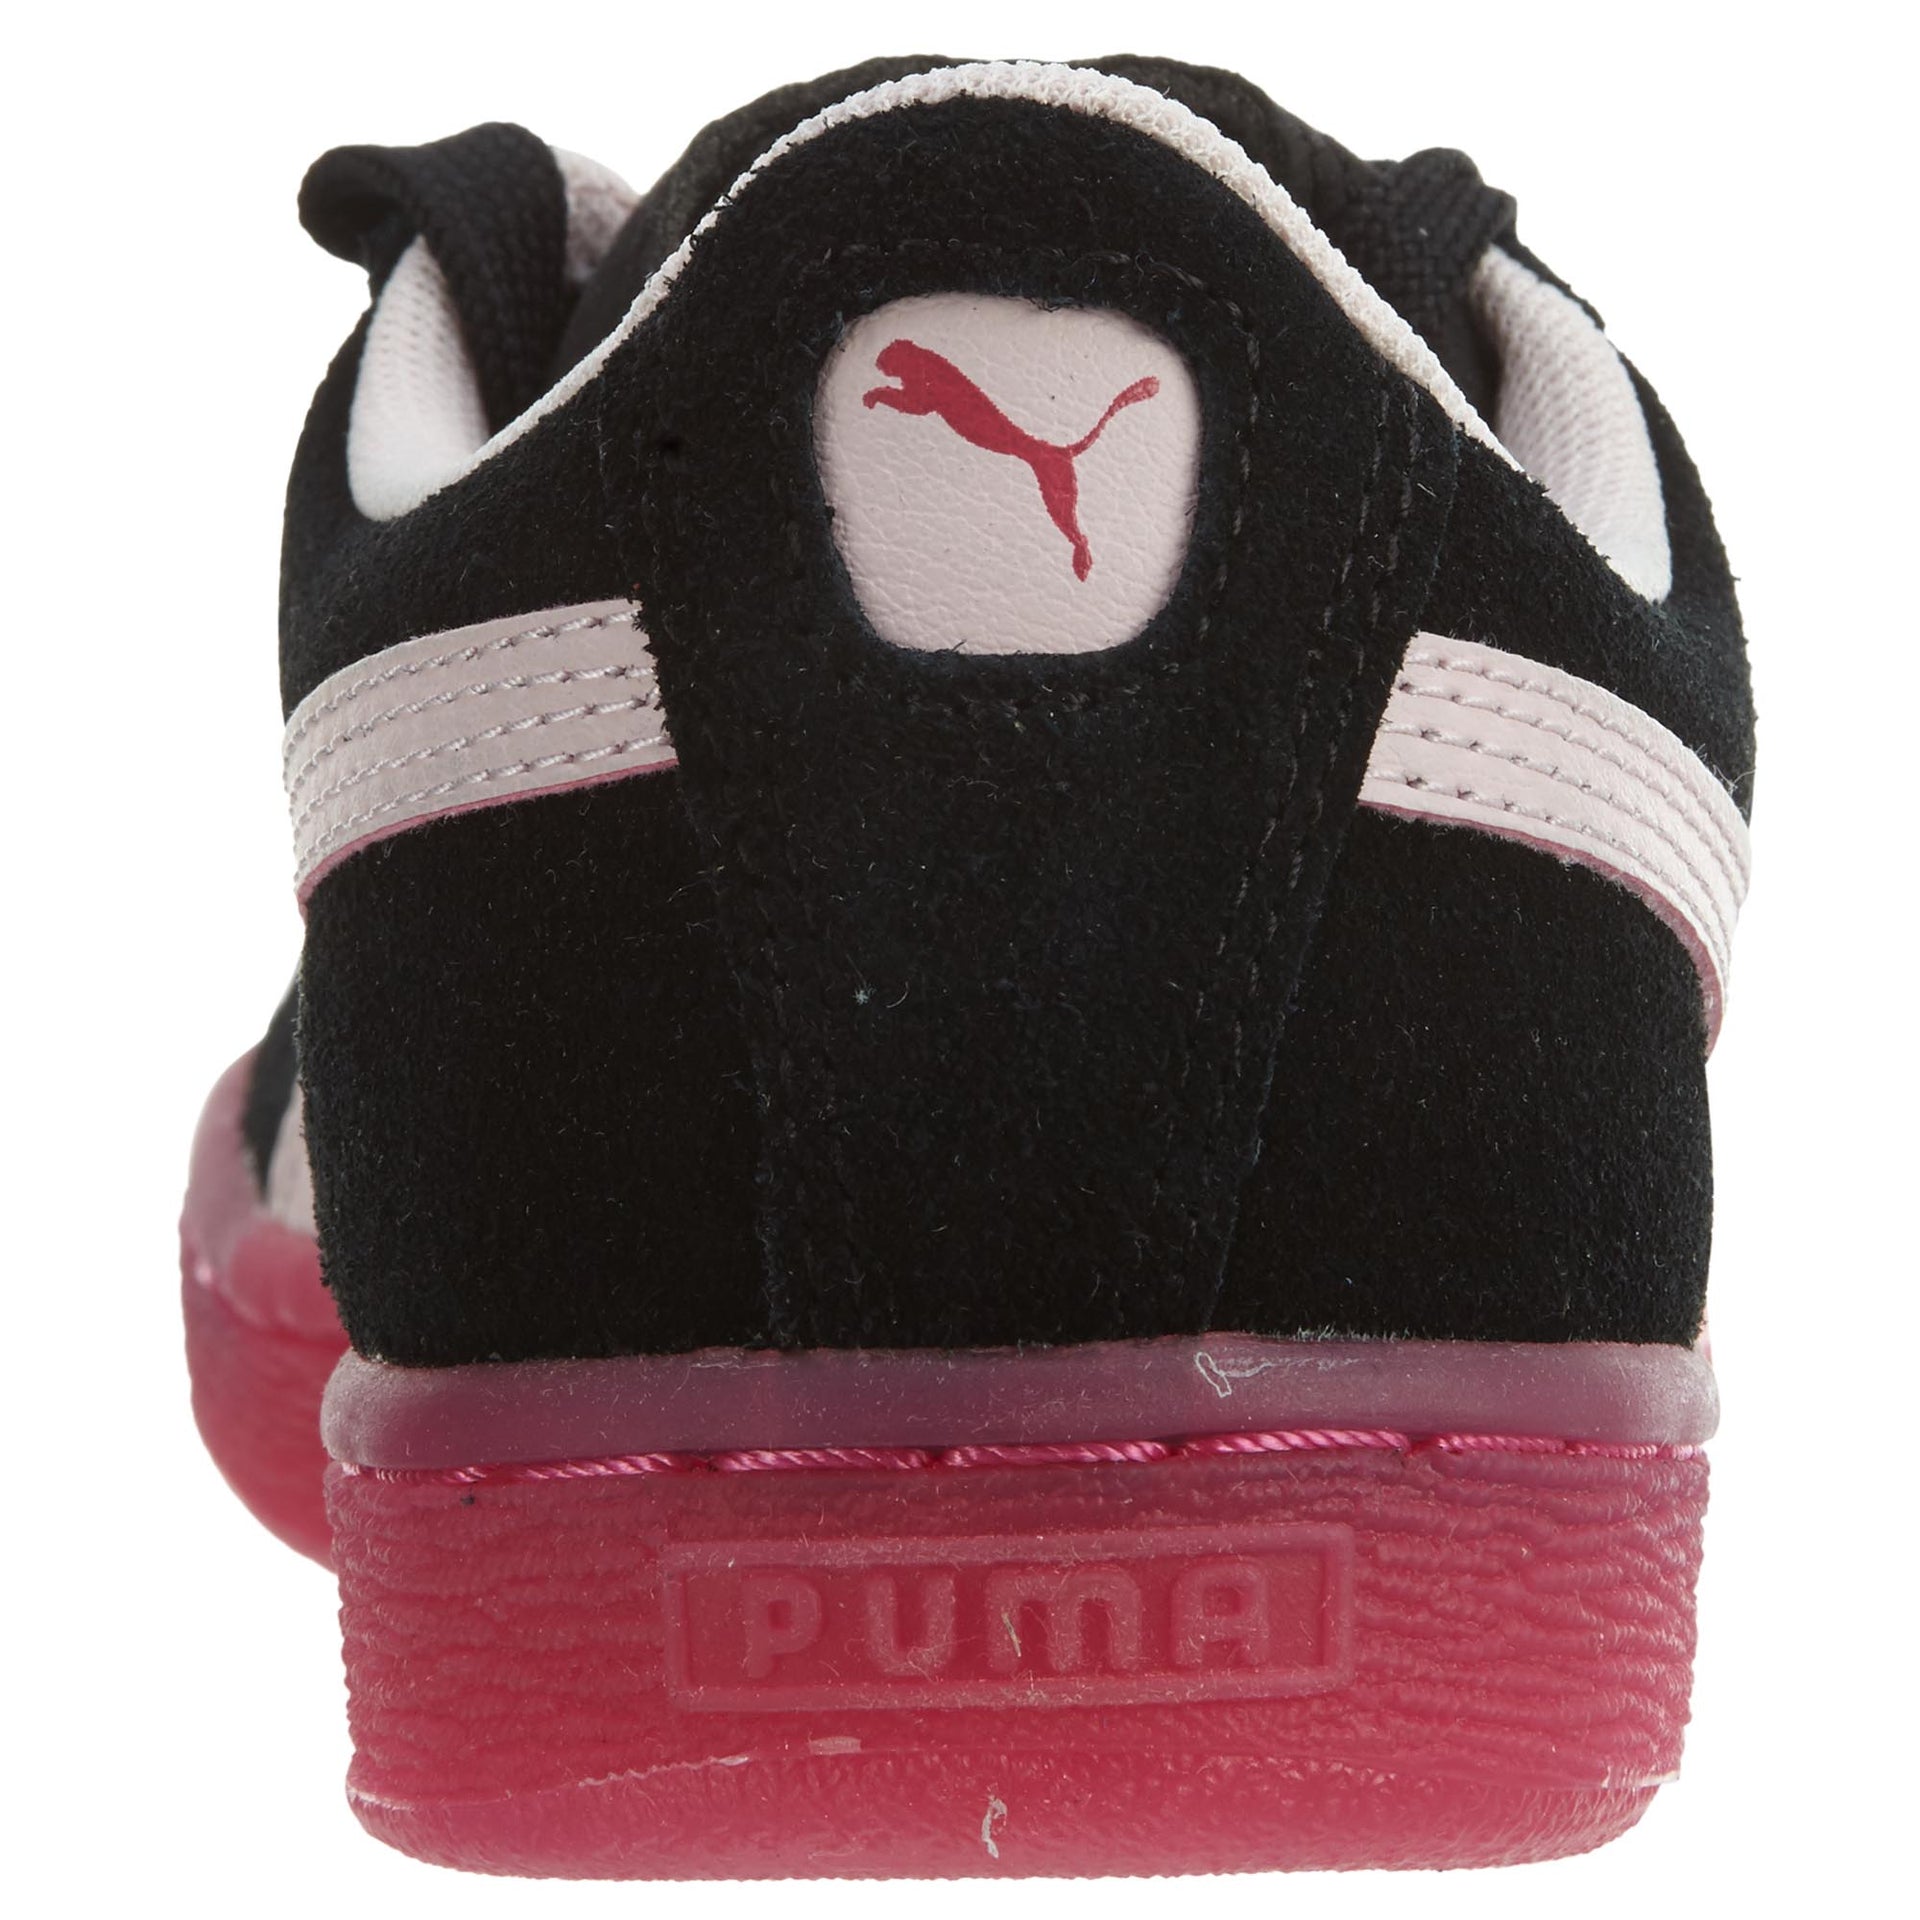 Puma Suede Lfs Iced Ps Little Kids Style : 363246